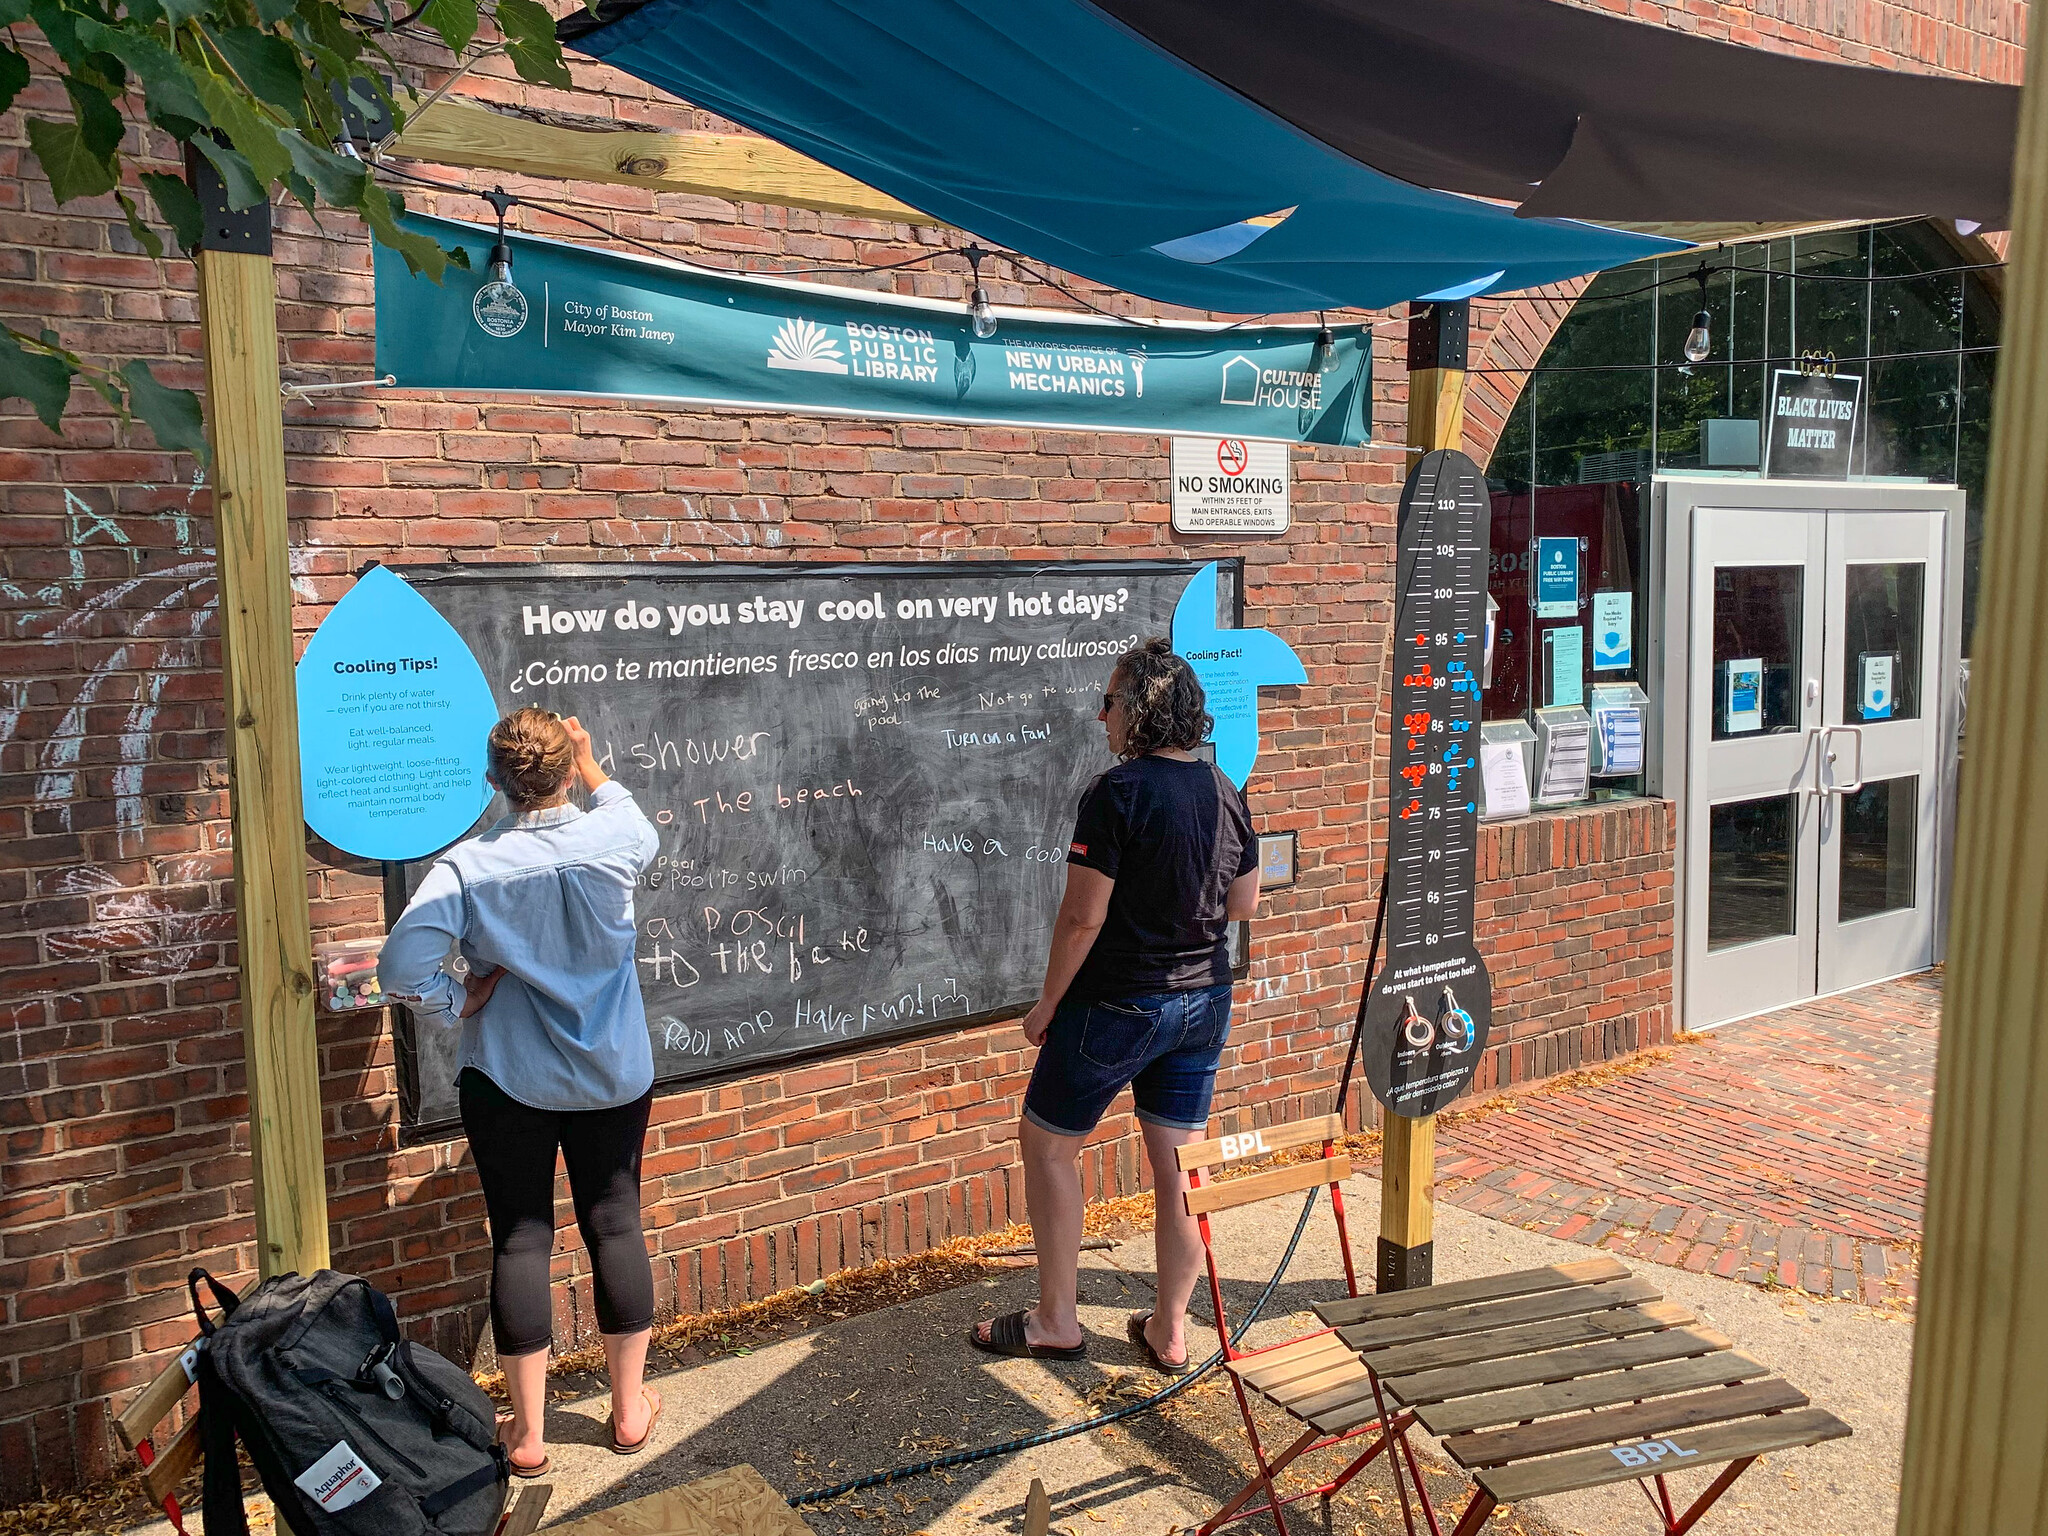 People standing outside in front of a chalkboard asking "how do you stay cool?"